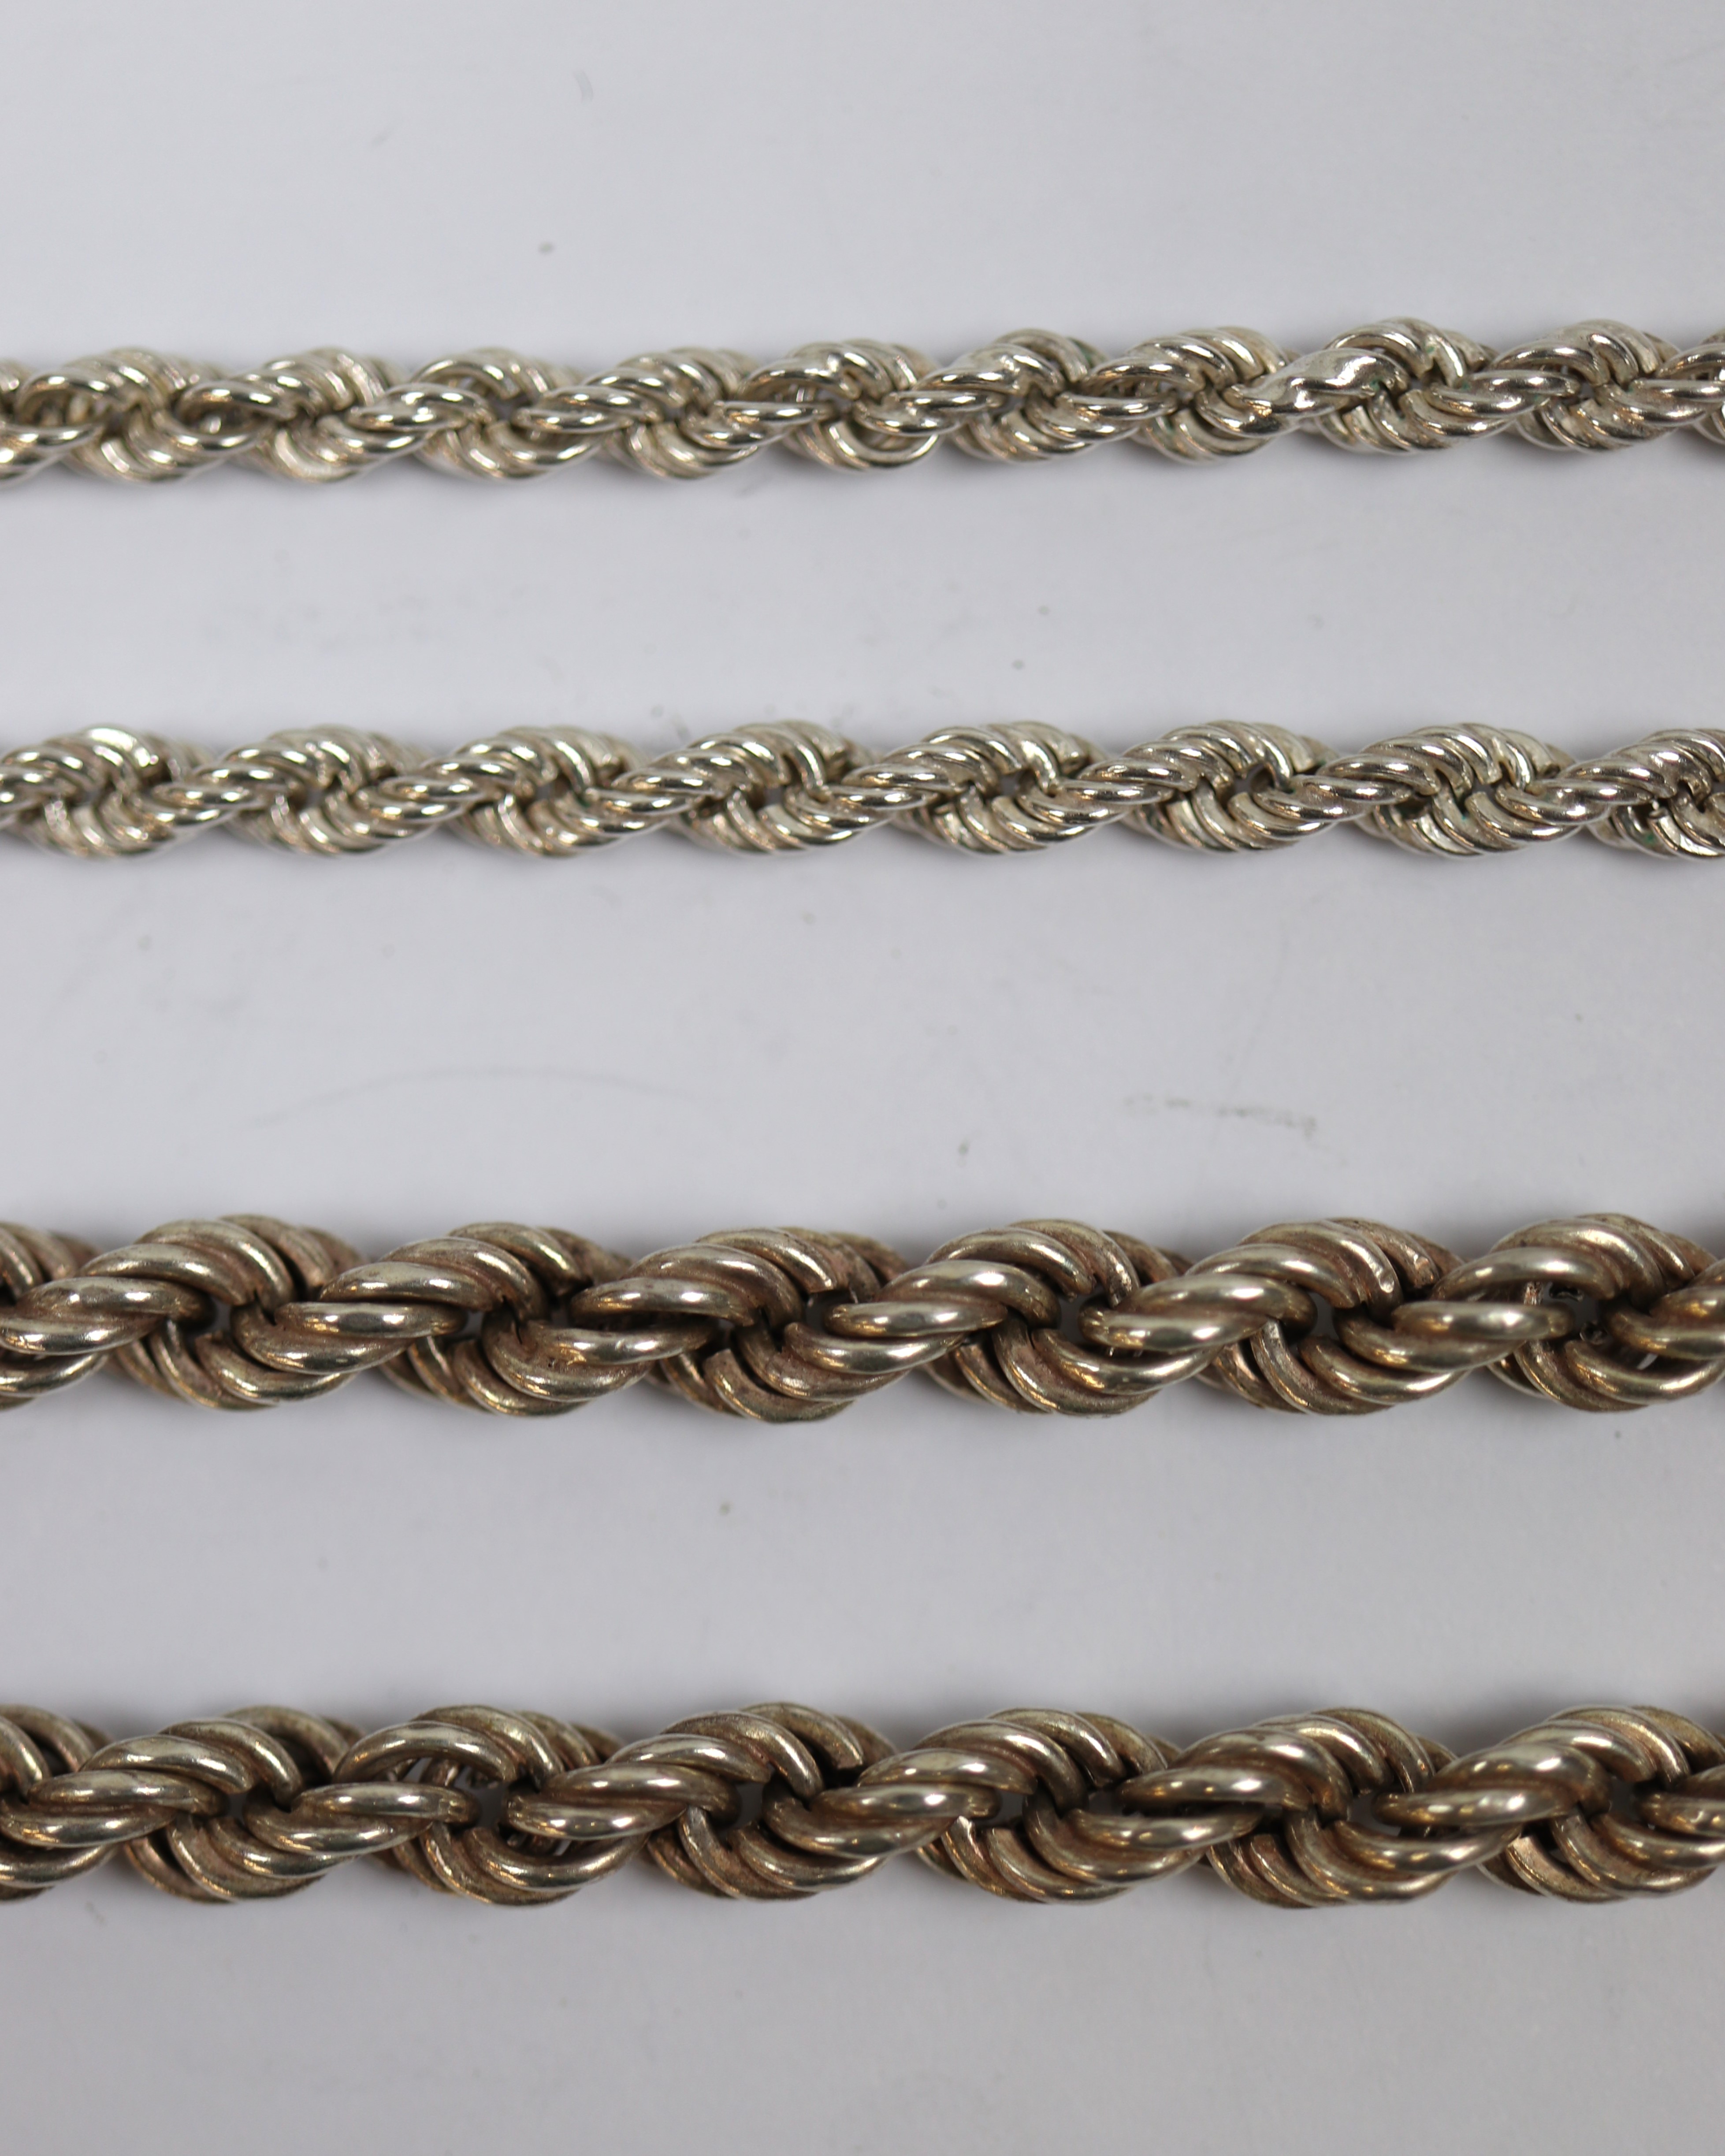 2 silver rope necklaces - Image 2 of 2